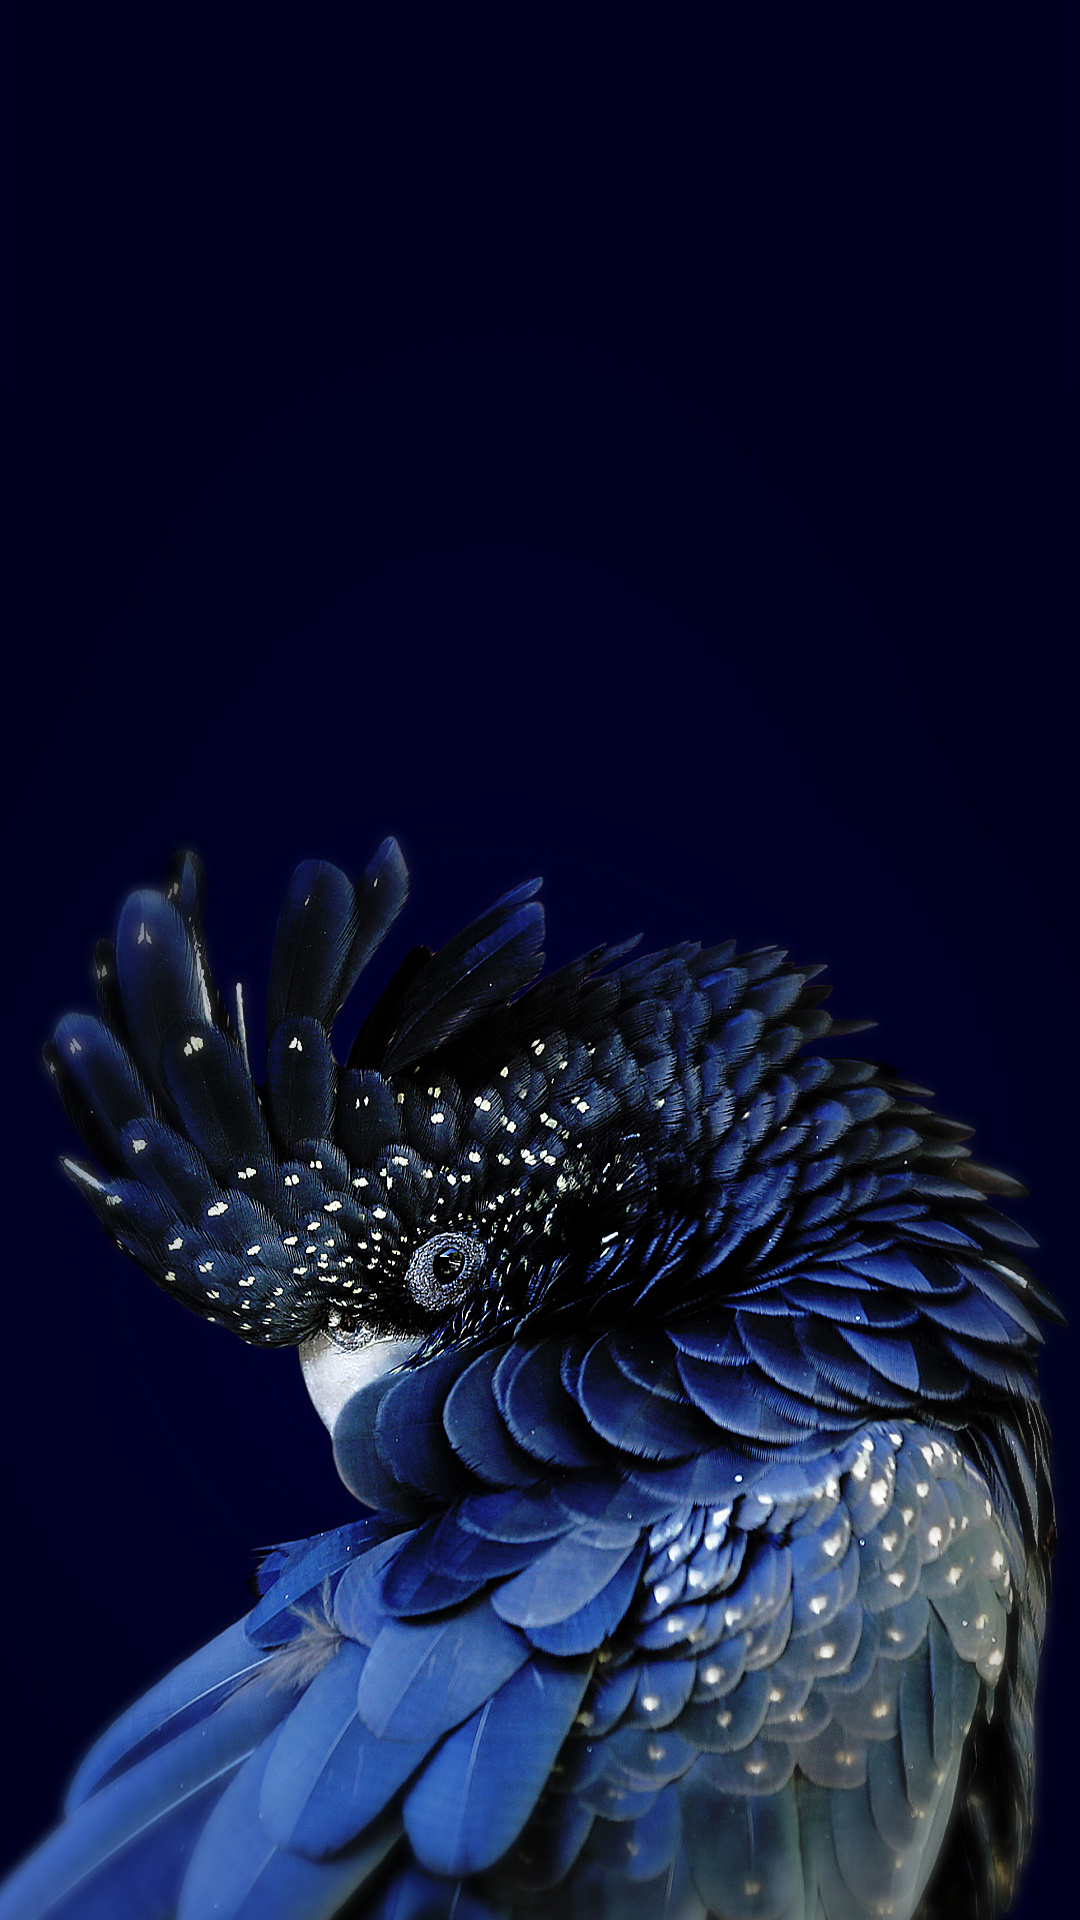 1080x1920 Parrot Wallpaper for iPhone 11, Pro Max, X, 8, 7, 6 Free Download on 3Wallpapers